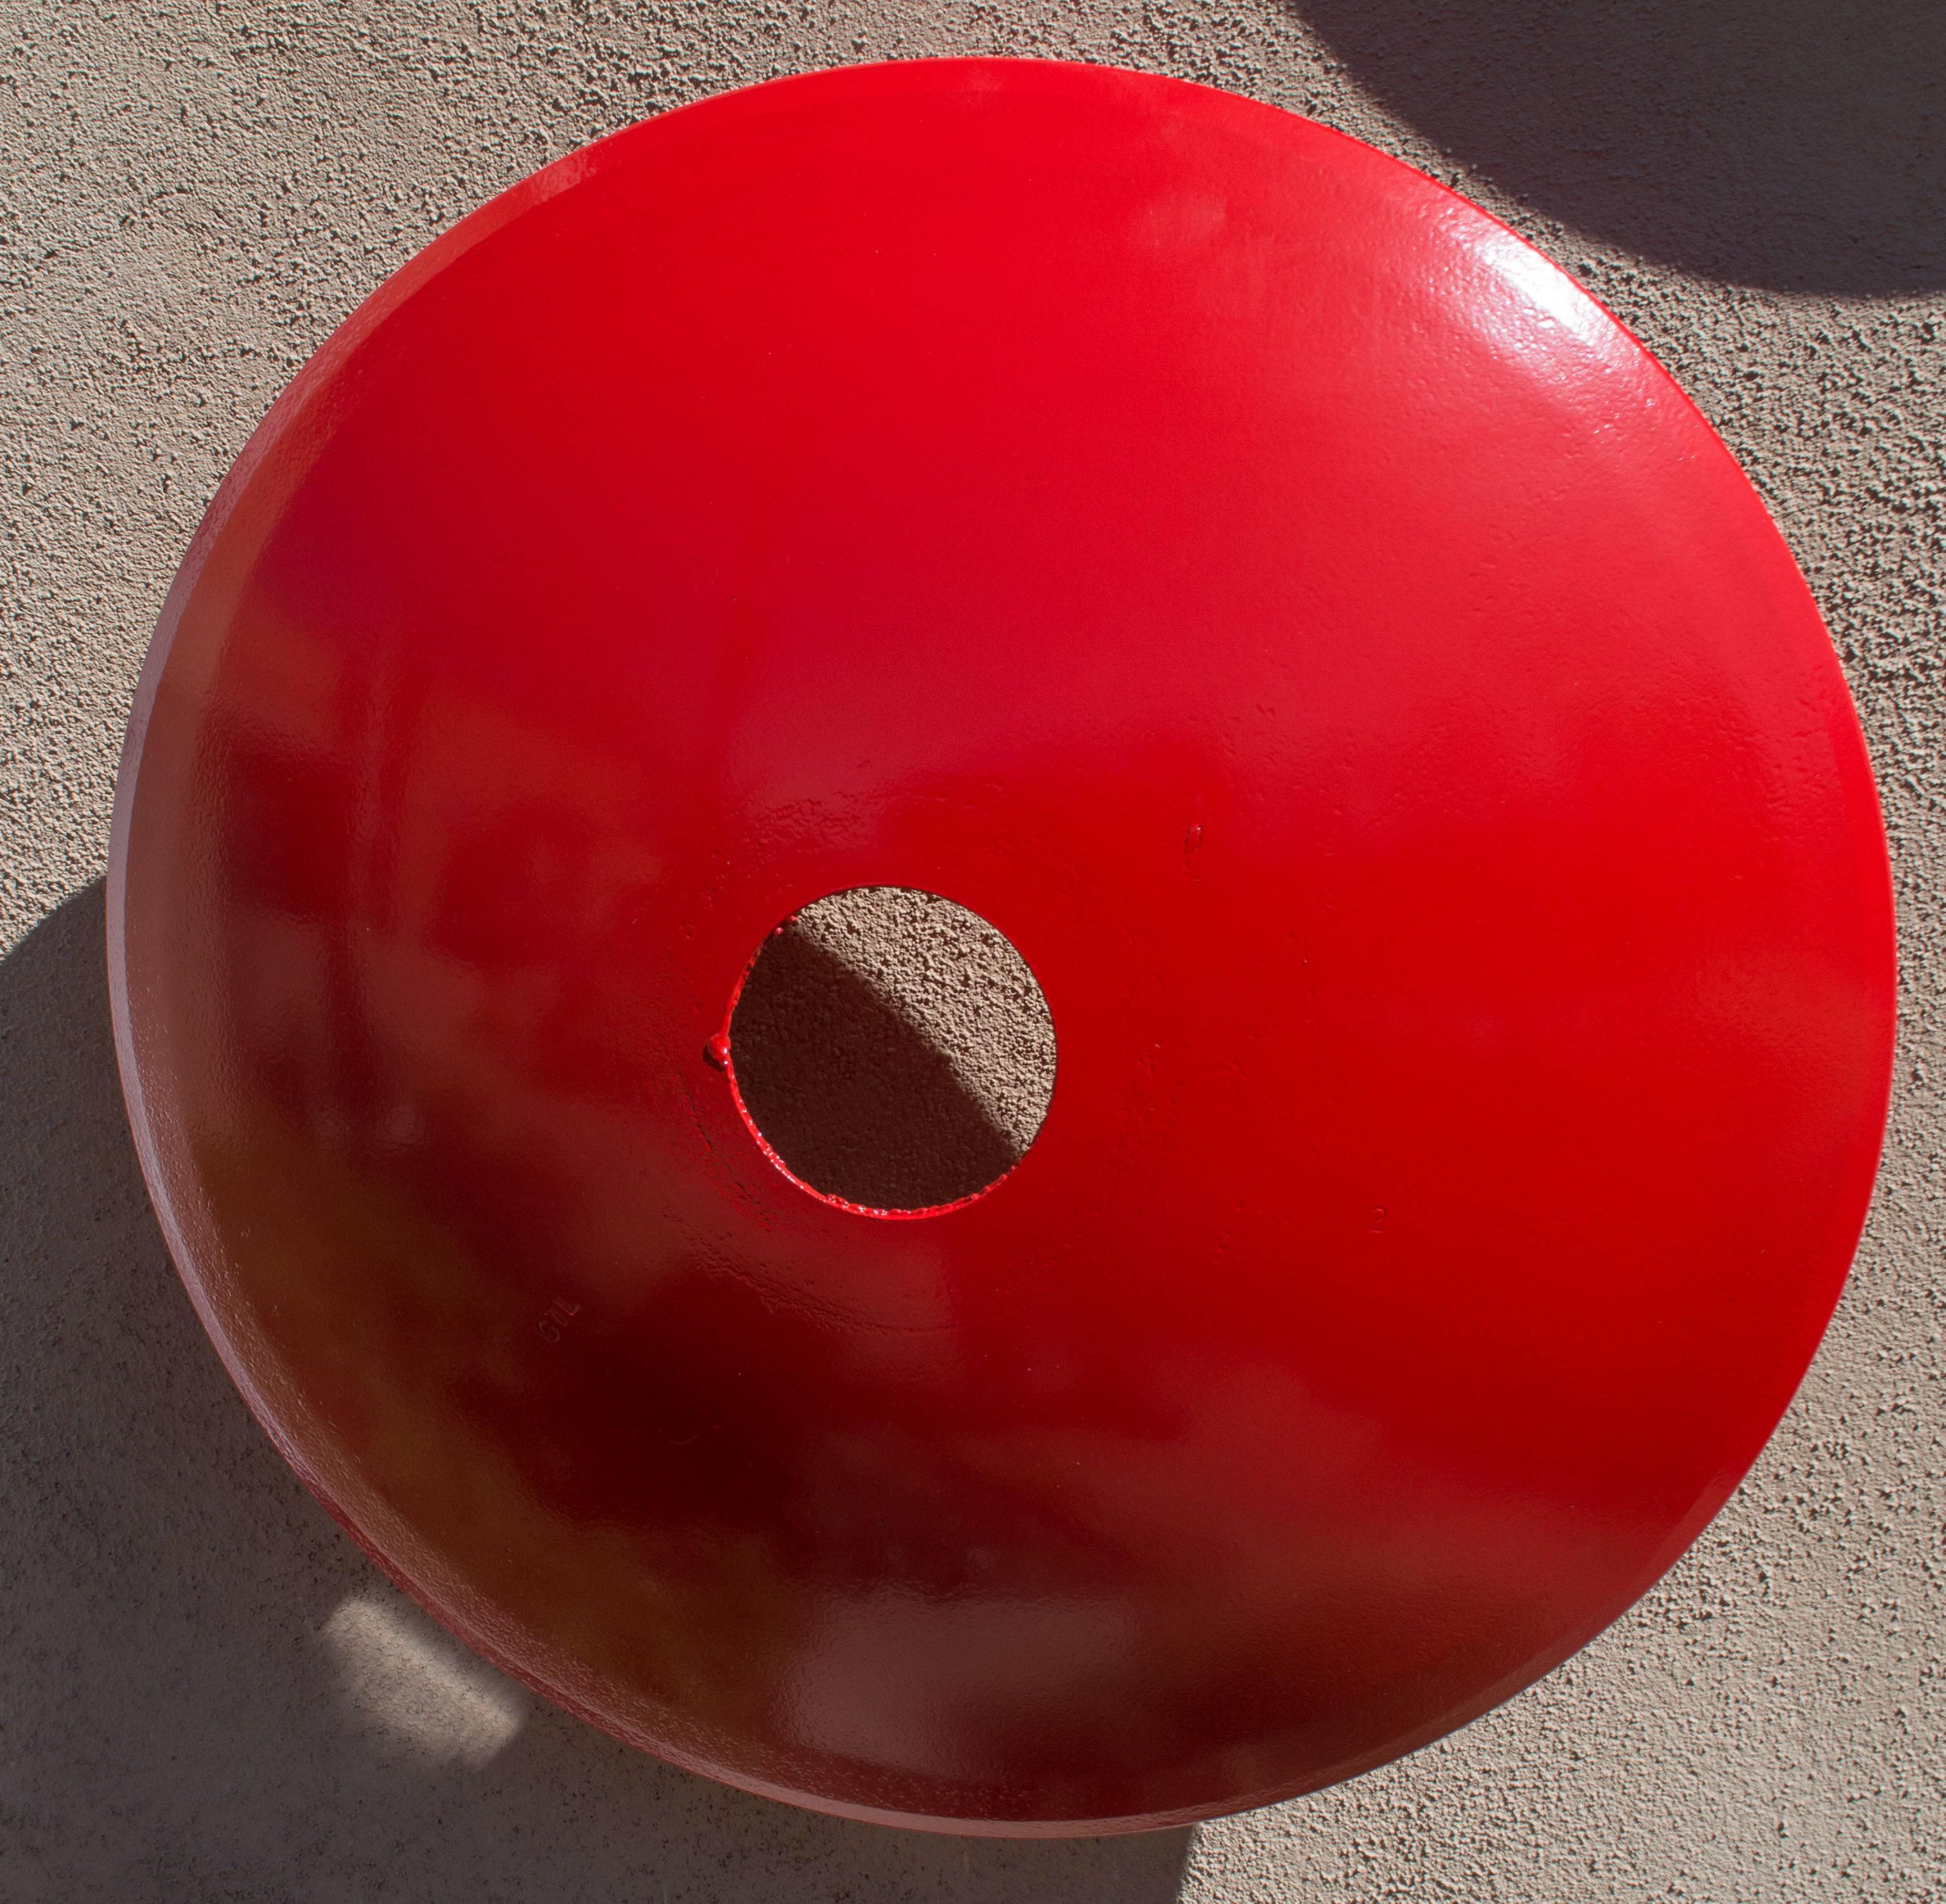 Michael Freed and Adam Rosen Abstract Sculpture - Terrace Disc, large red orange